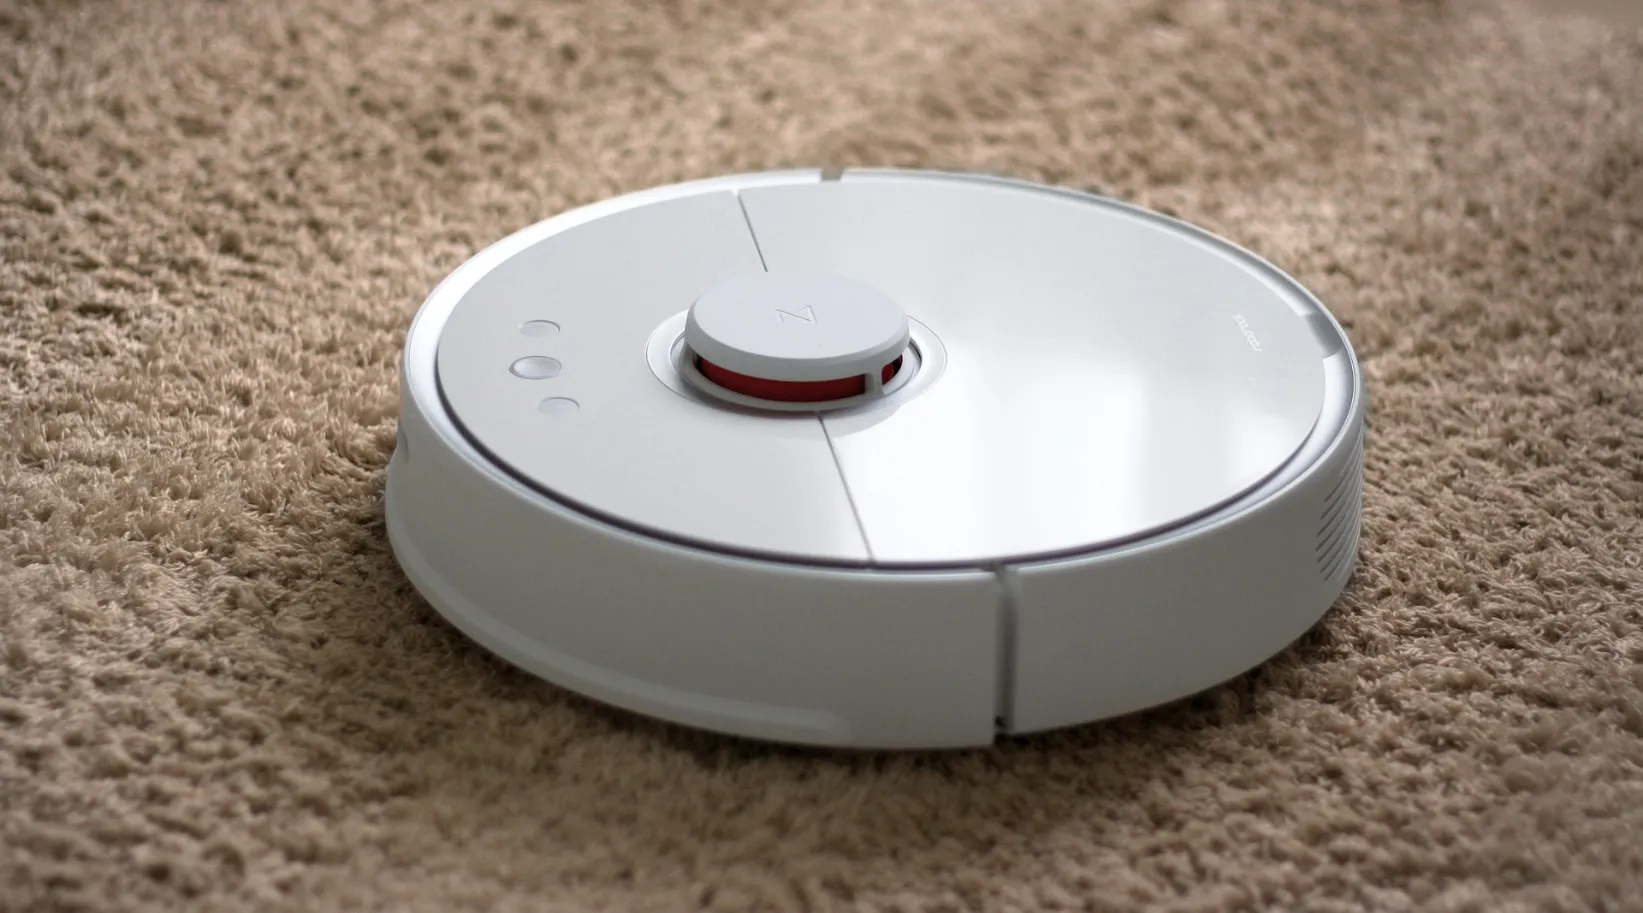 Care for Robot Vacuum Properly.